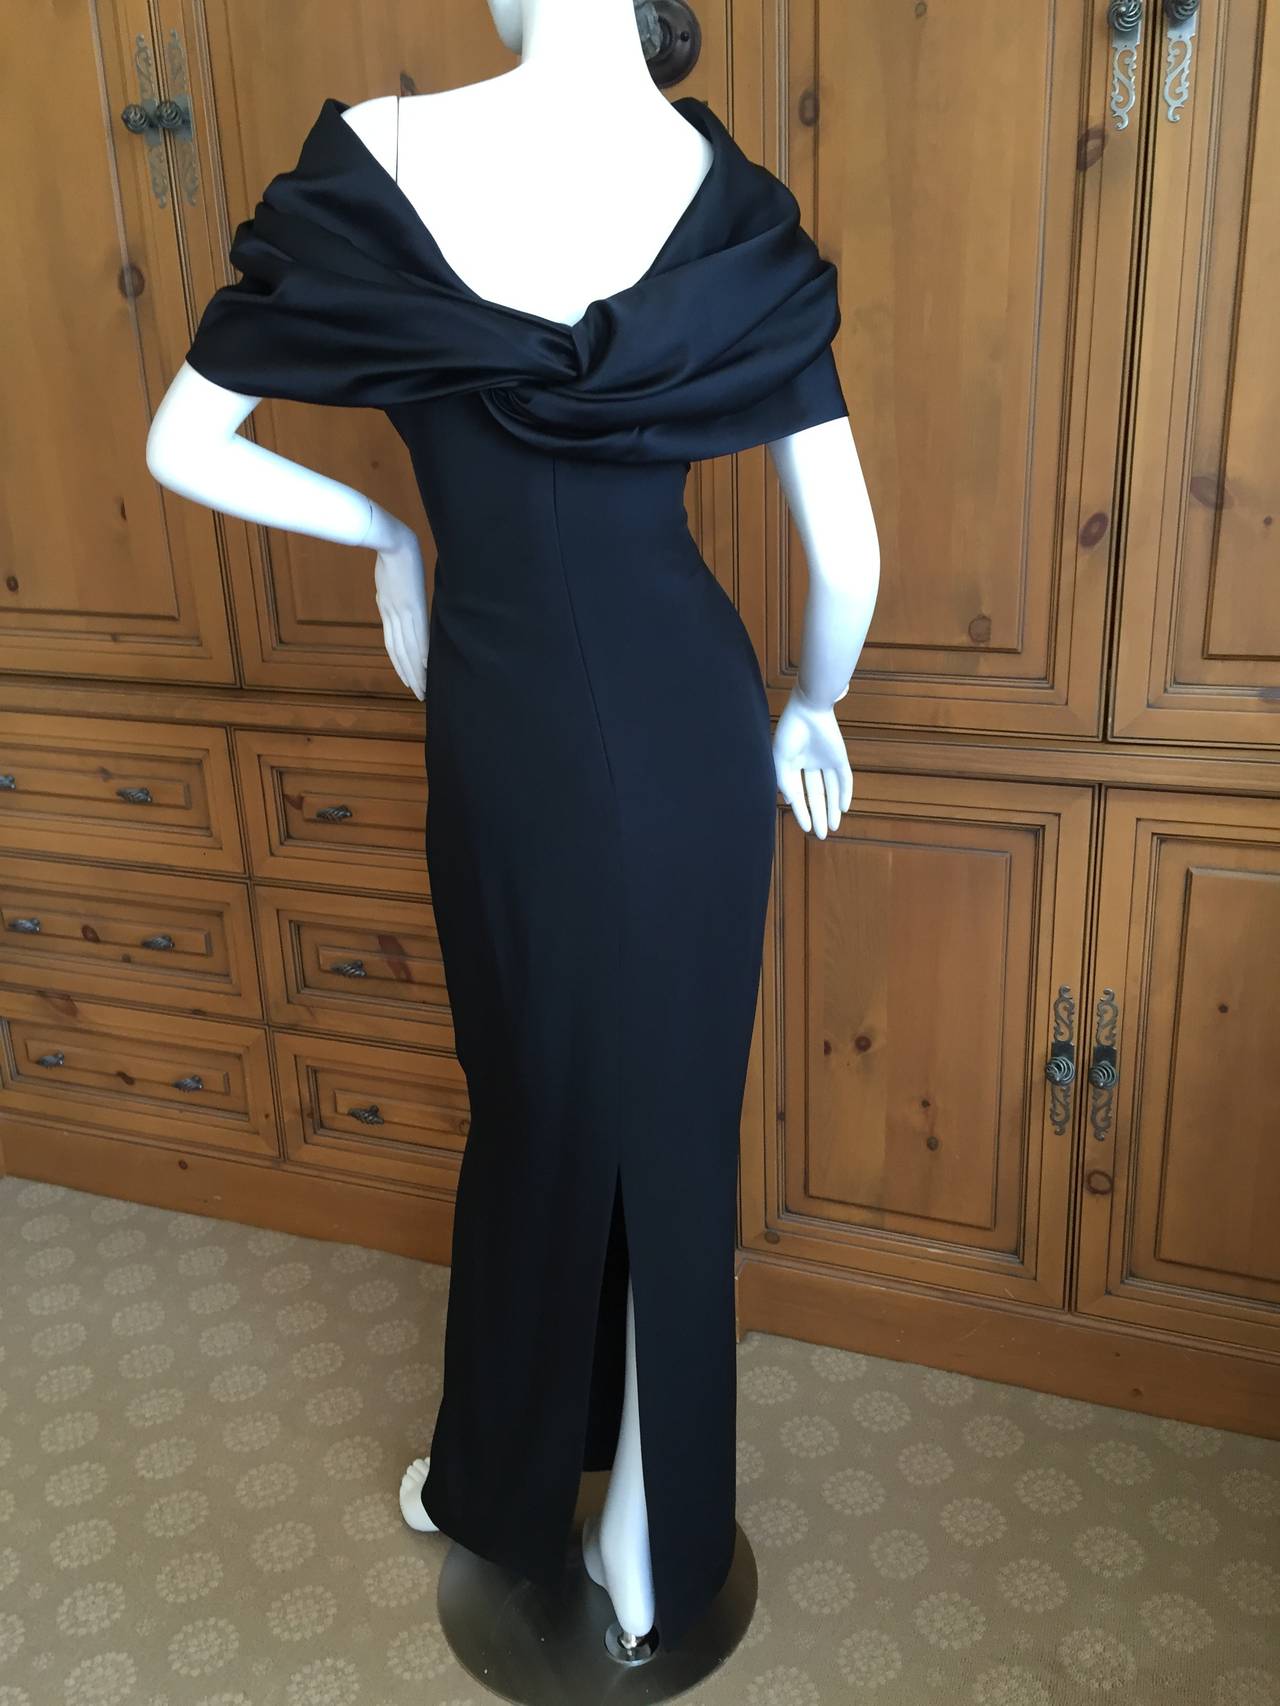 Bill Blass Lovely 70's Black Sleeveless Dress with Attached Capelet / Stole 1